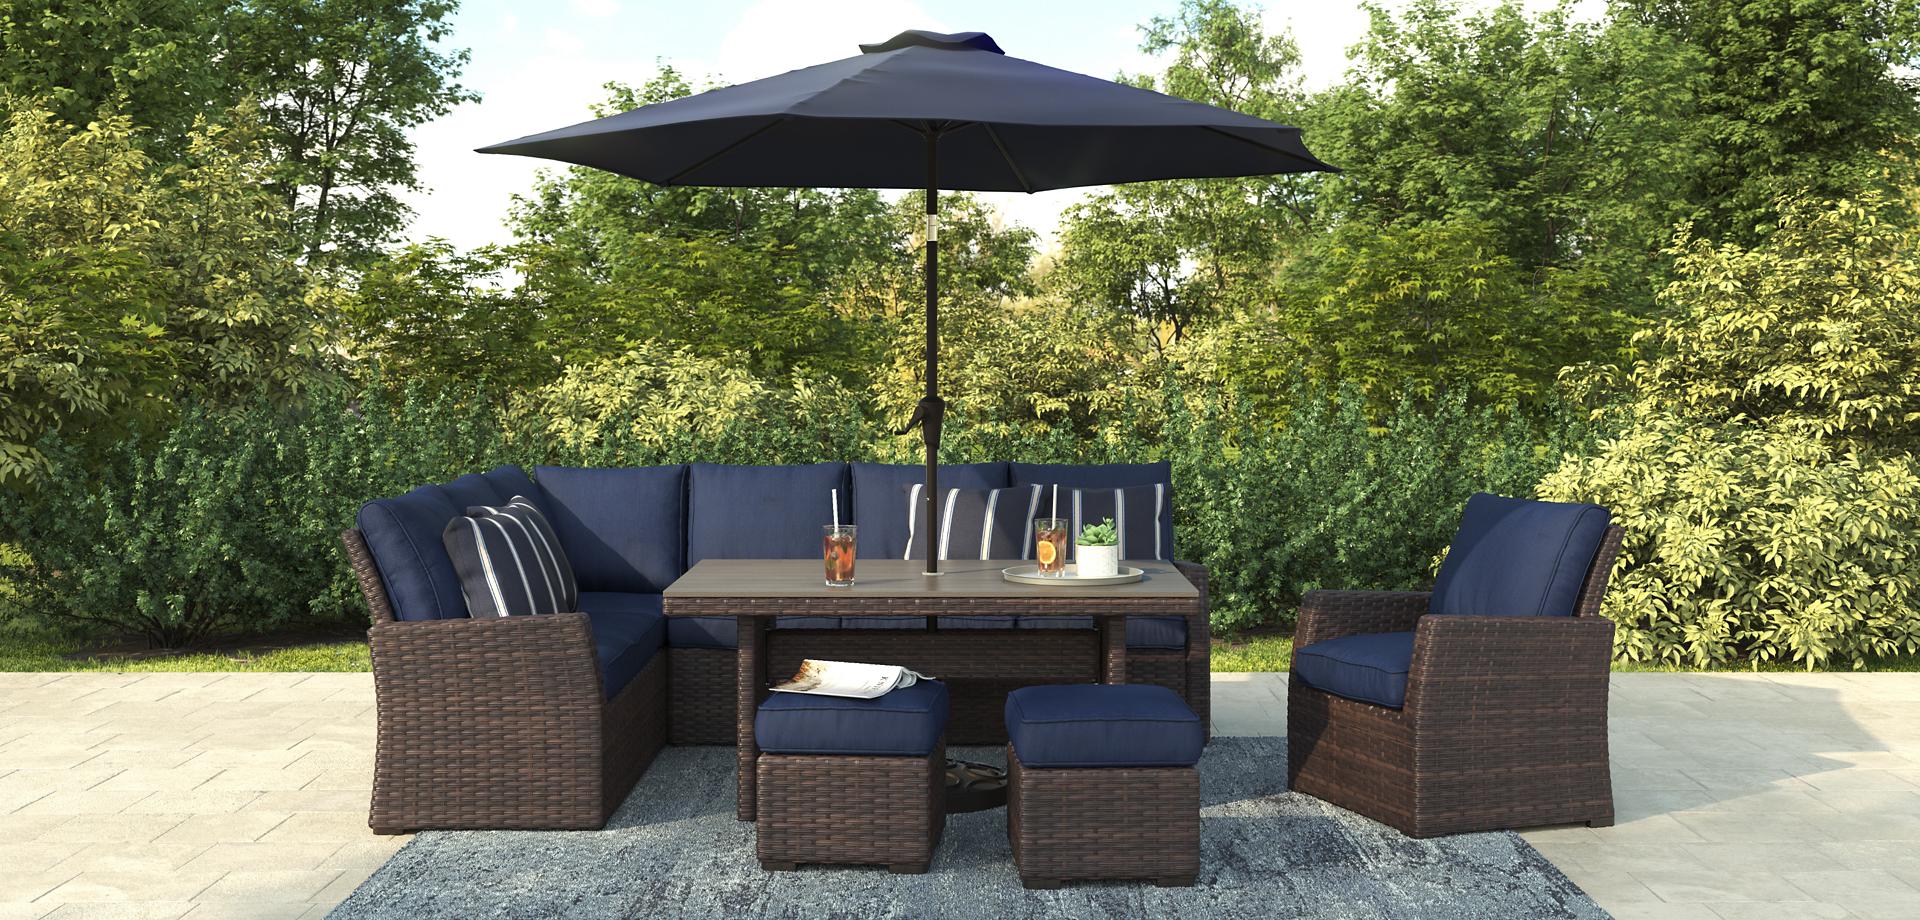 Outdoor Lifestyle Image - Geneva Collection.